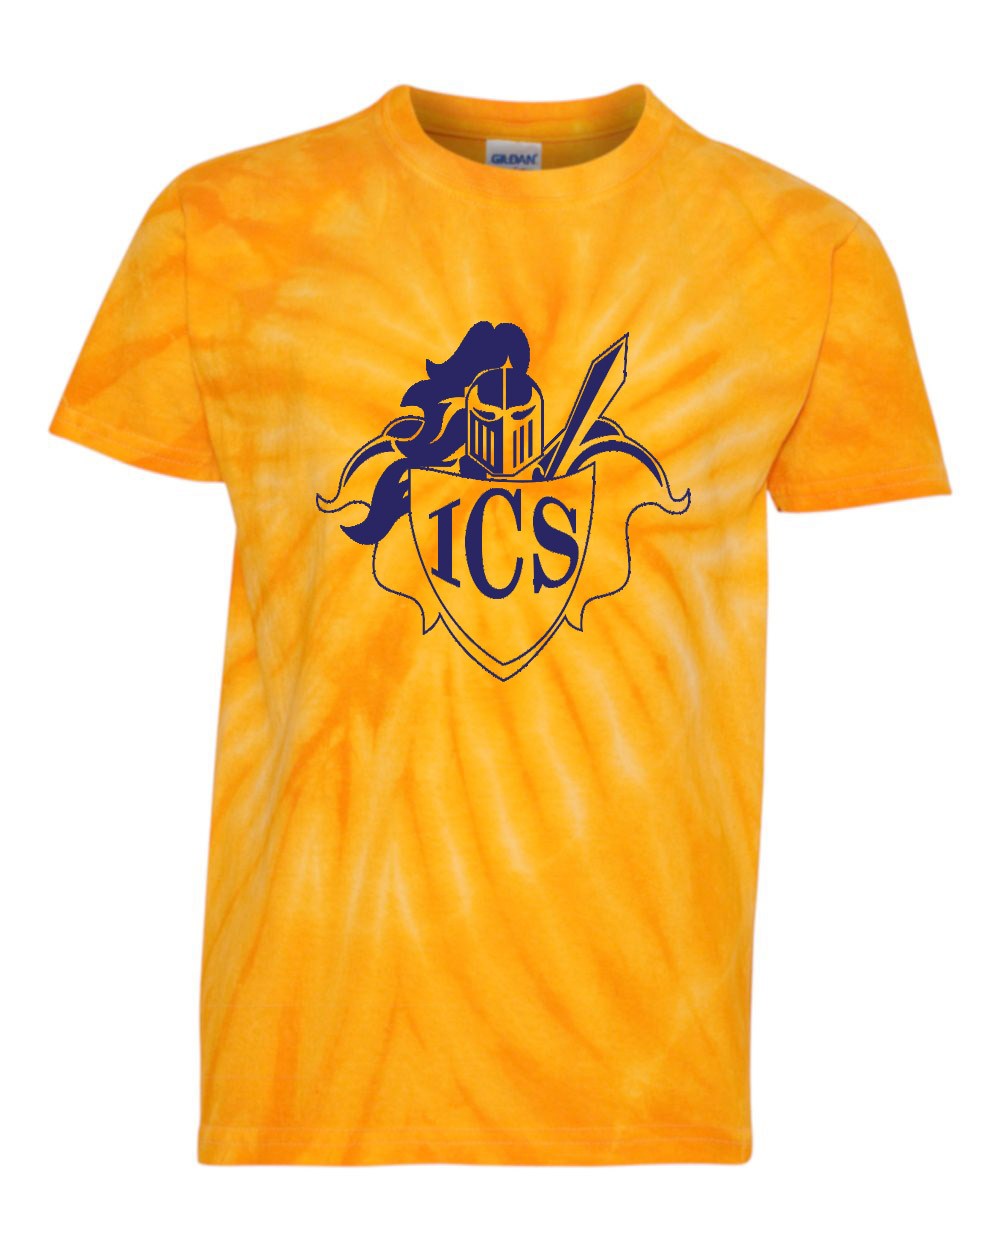 ICS Staff S/S Tie Dye T-Shirt w/ Navy Logo - Please Allow 2-3 Weeks for Delivery